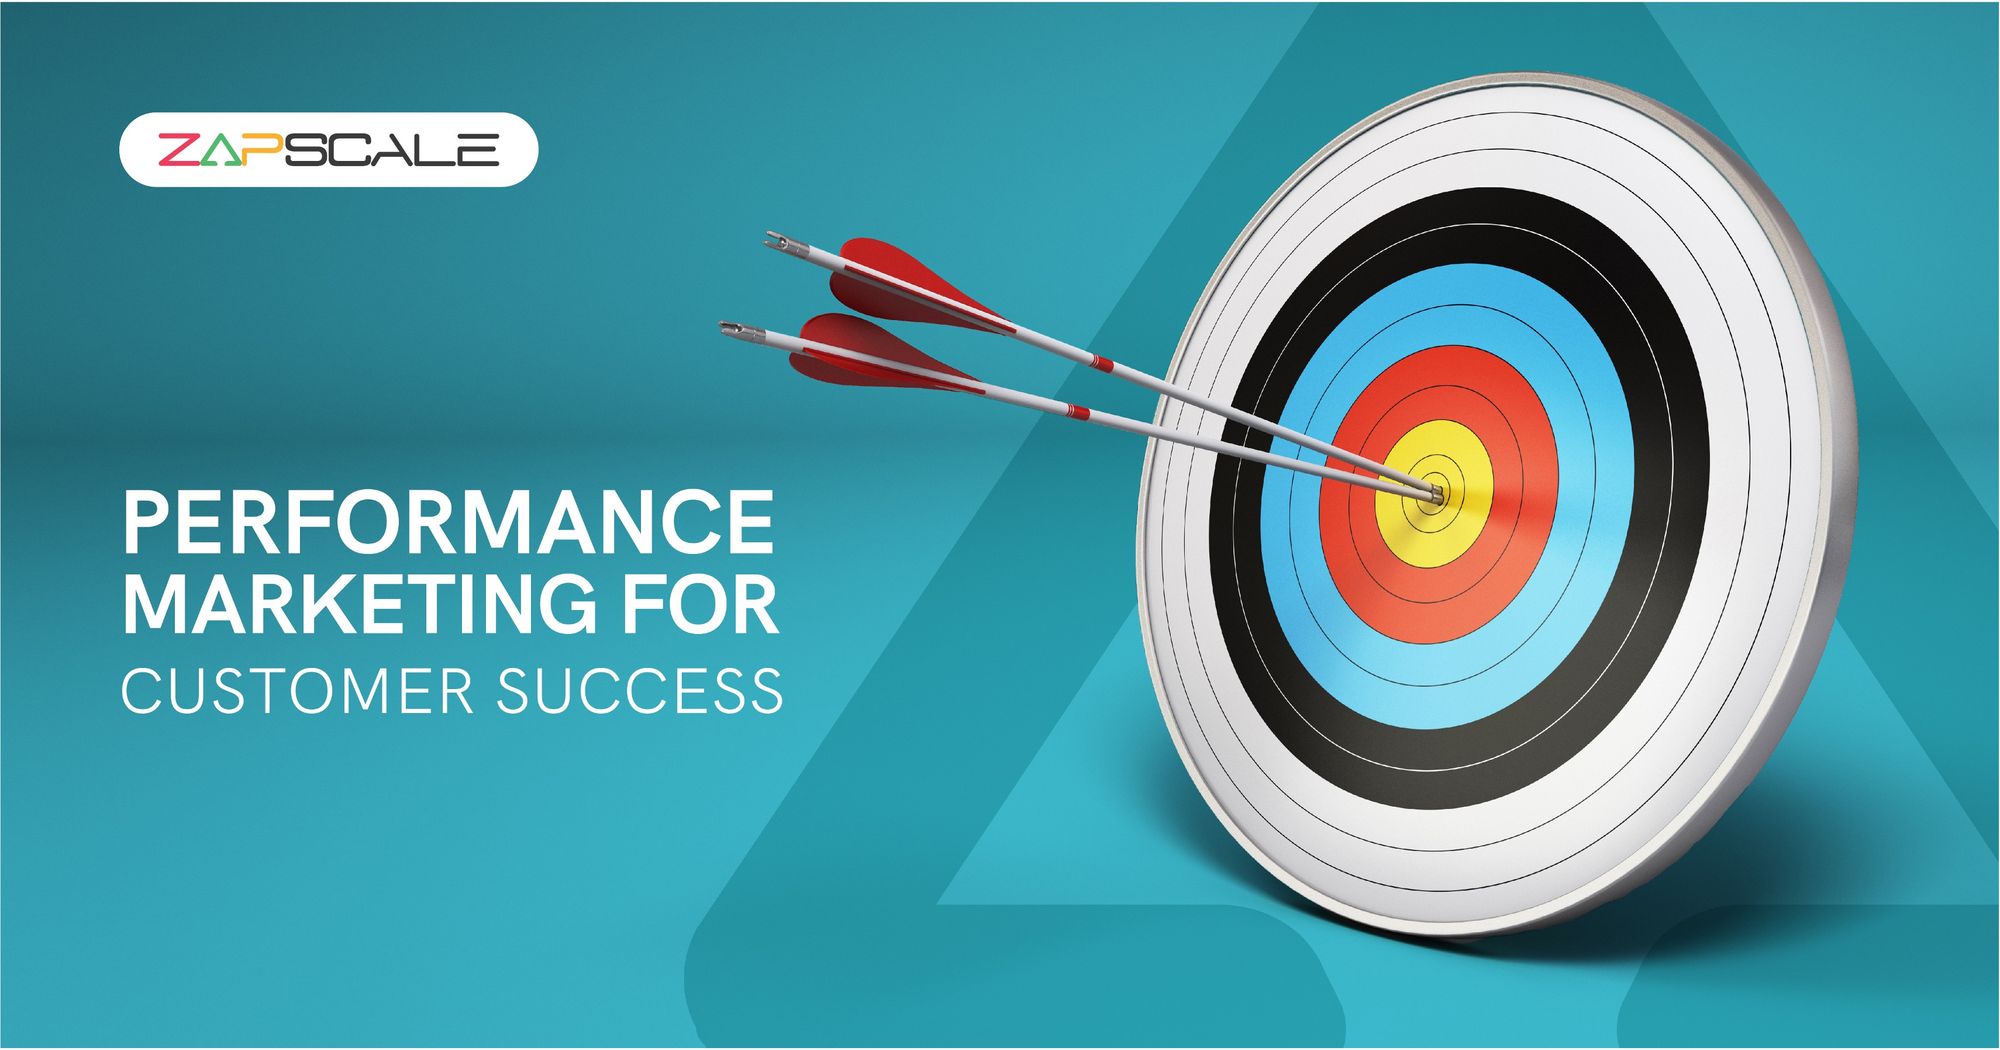 Redefining Performance Marketing for Customer Success